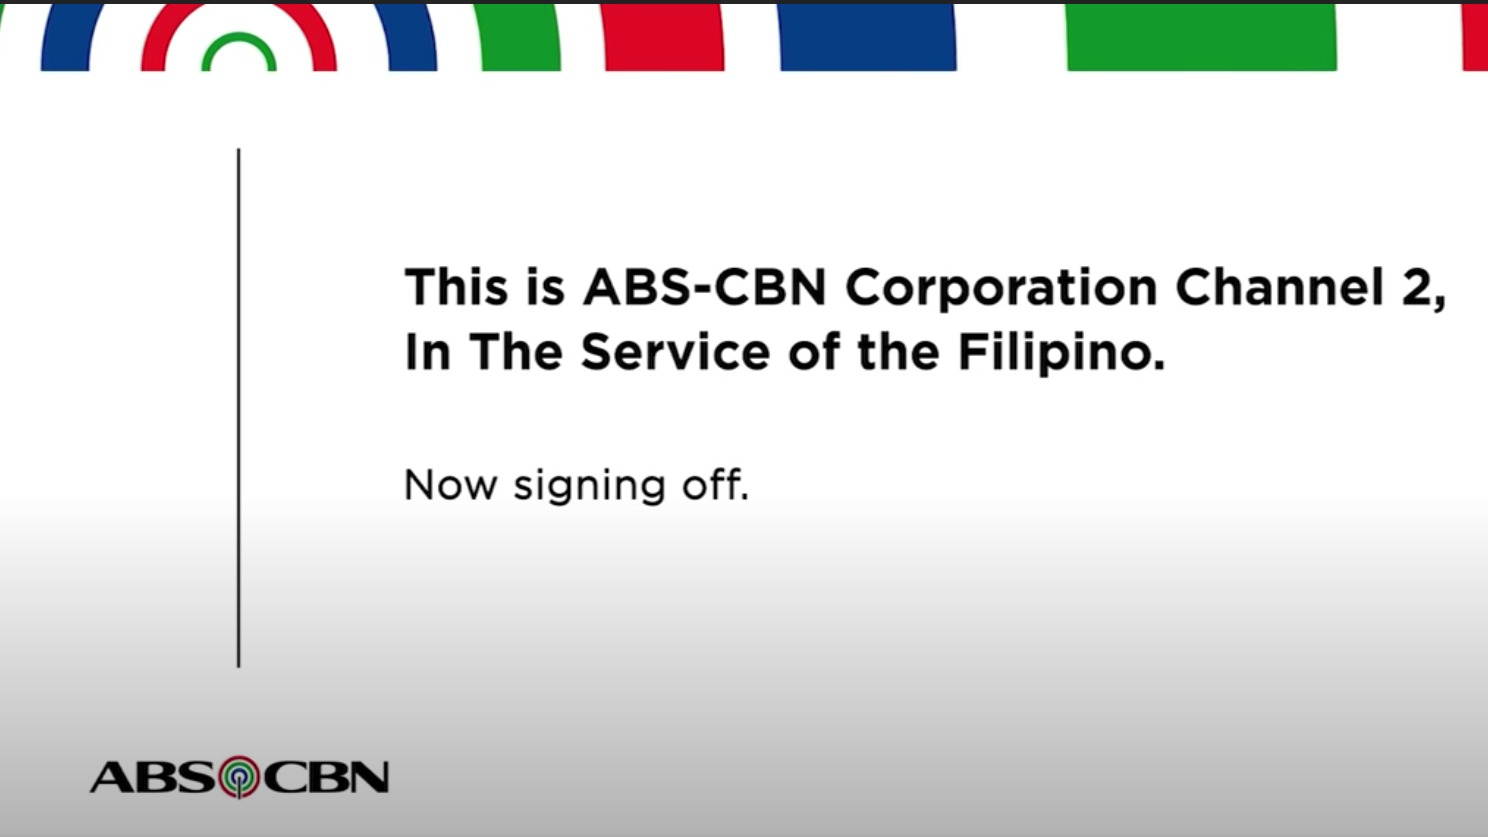 OFF-AIR. ABS-CBN airs its sign-off at 7:52 pm on May 5 as it complies with a cease and desist order from the National Telecommunications Commission. Screenshot from YouTube.com/TheABSCBNNews 